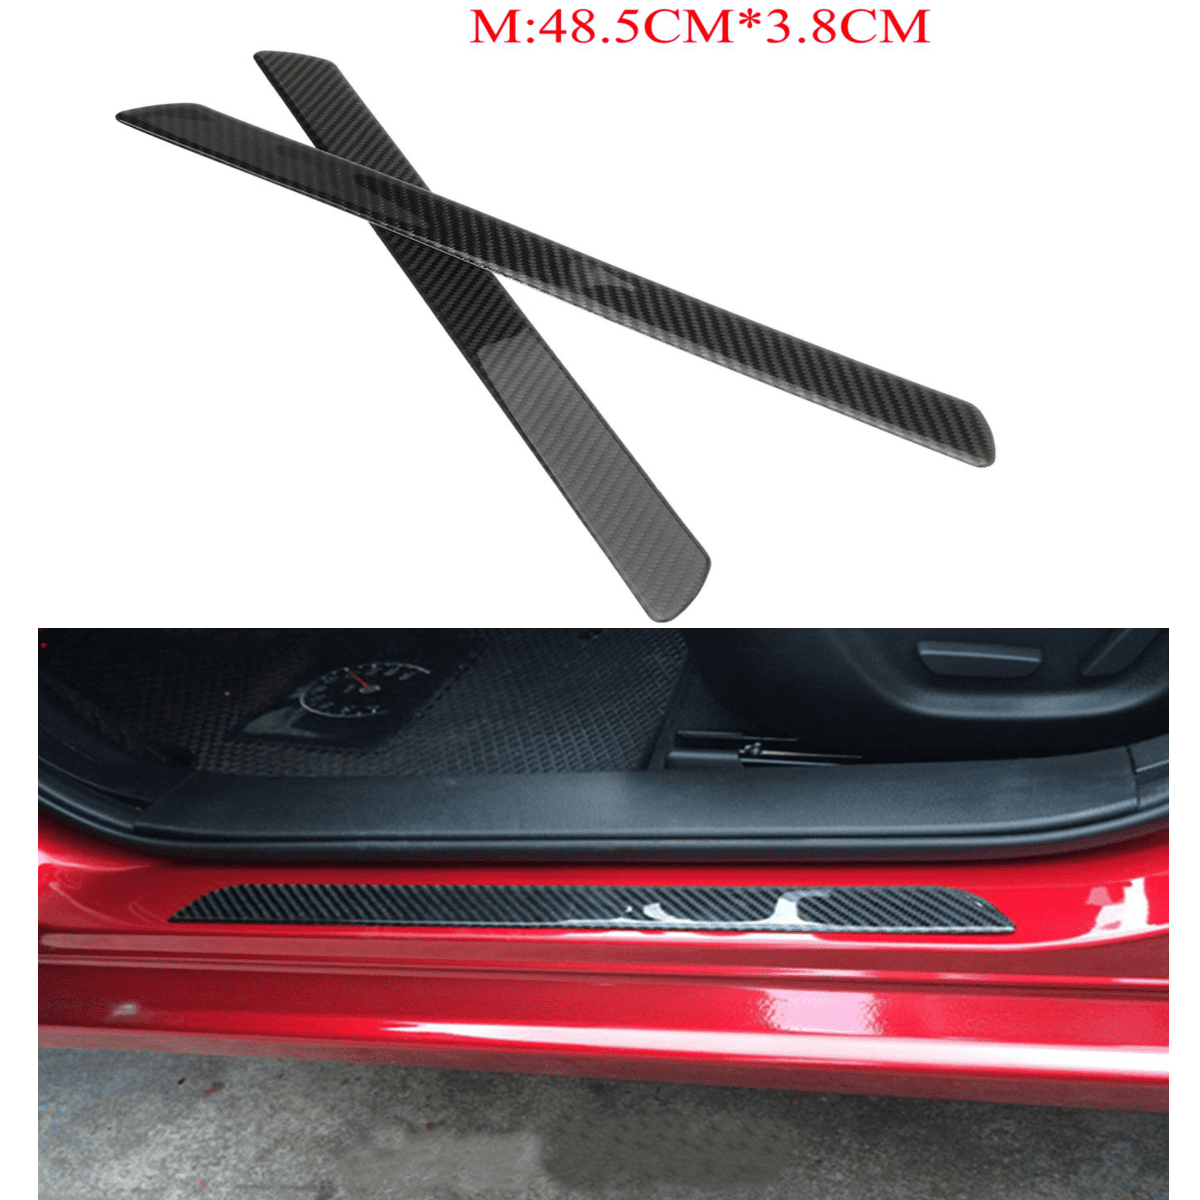 4PCs Door Threshold Guard for Dodge Ram Car Door Sill Scuff Plate Protector Carbon Fiber Pu Leather Car Accessories Color Name: Red